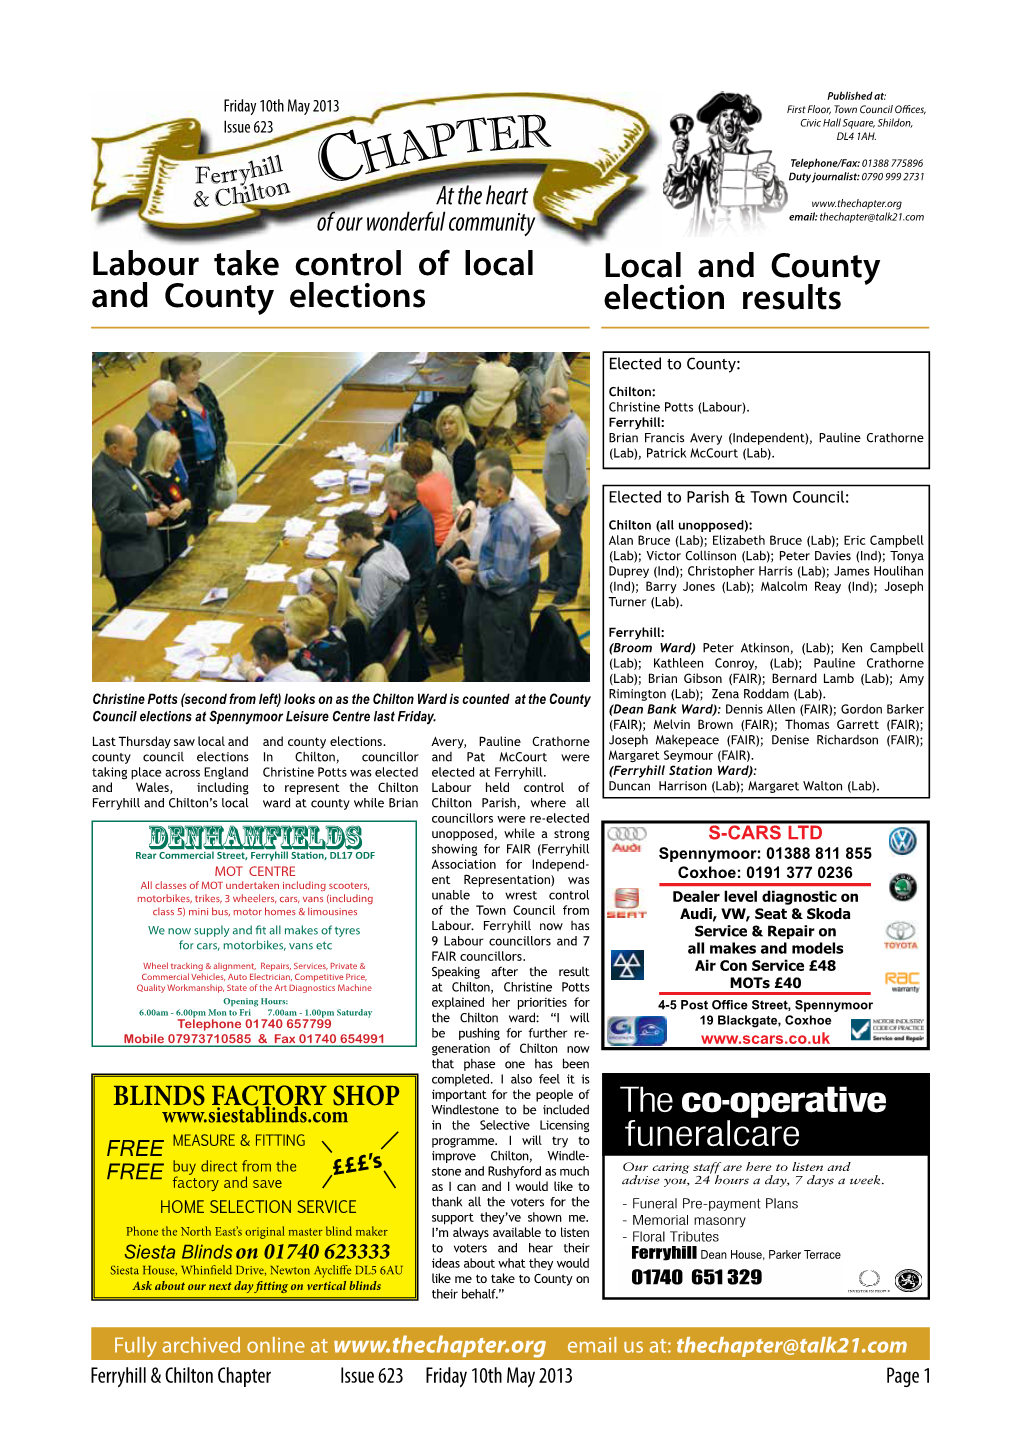 Chapter.Org of Our Wonderful Community Email: Thechapter@Talk21.Com Labour Take Control of Local Local and County and County Elections Election Results